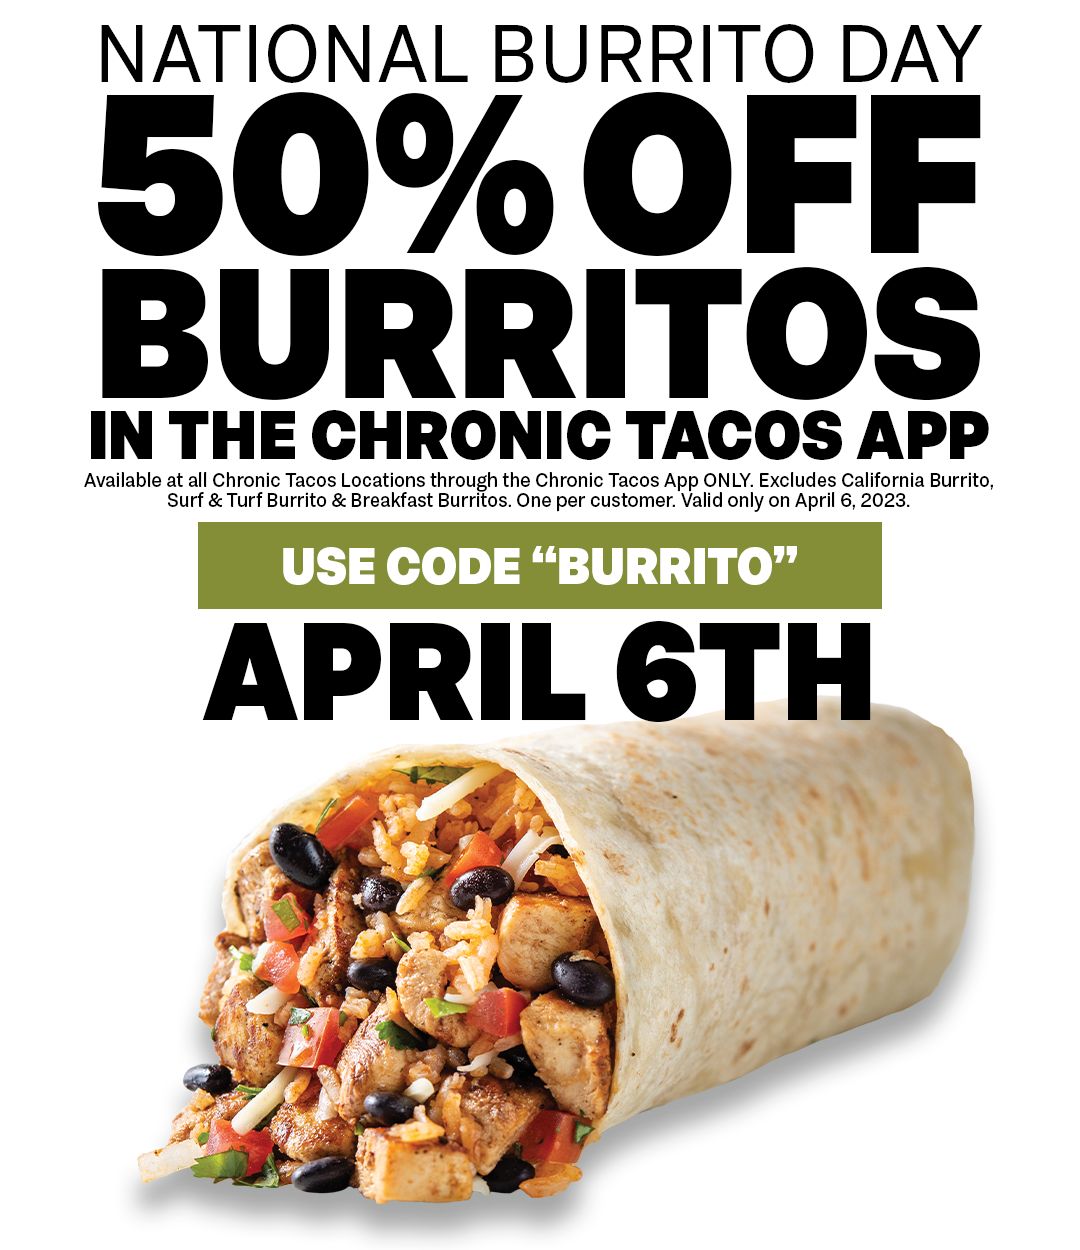 Chronic Tacos Celebrates National Burrito Day With 50% Off Burrito Deal & an Epic Giveaway